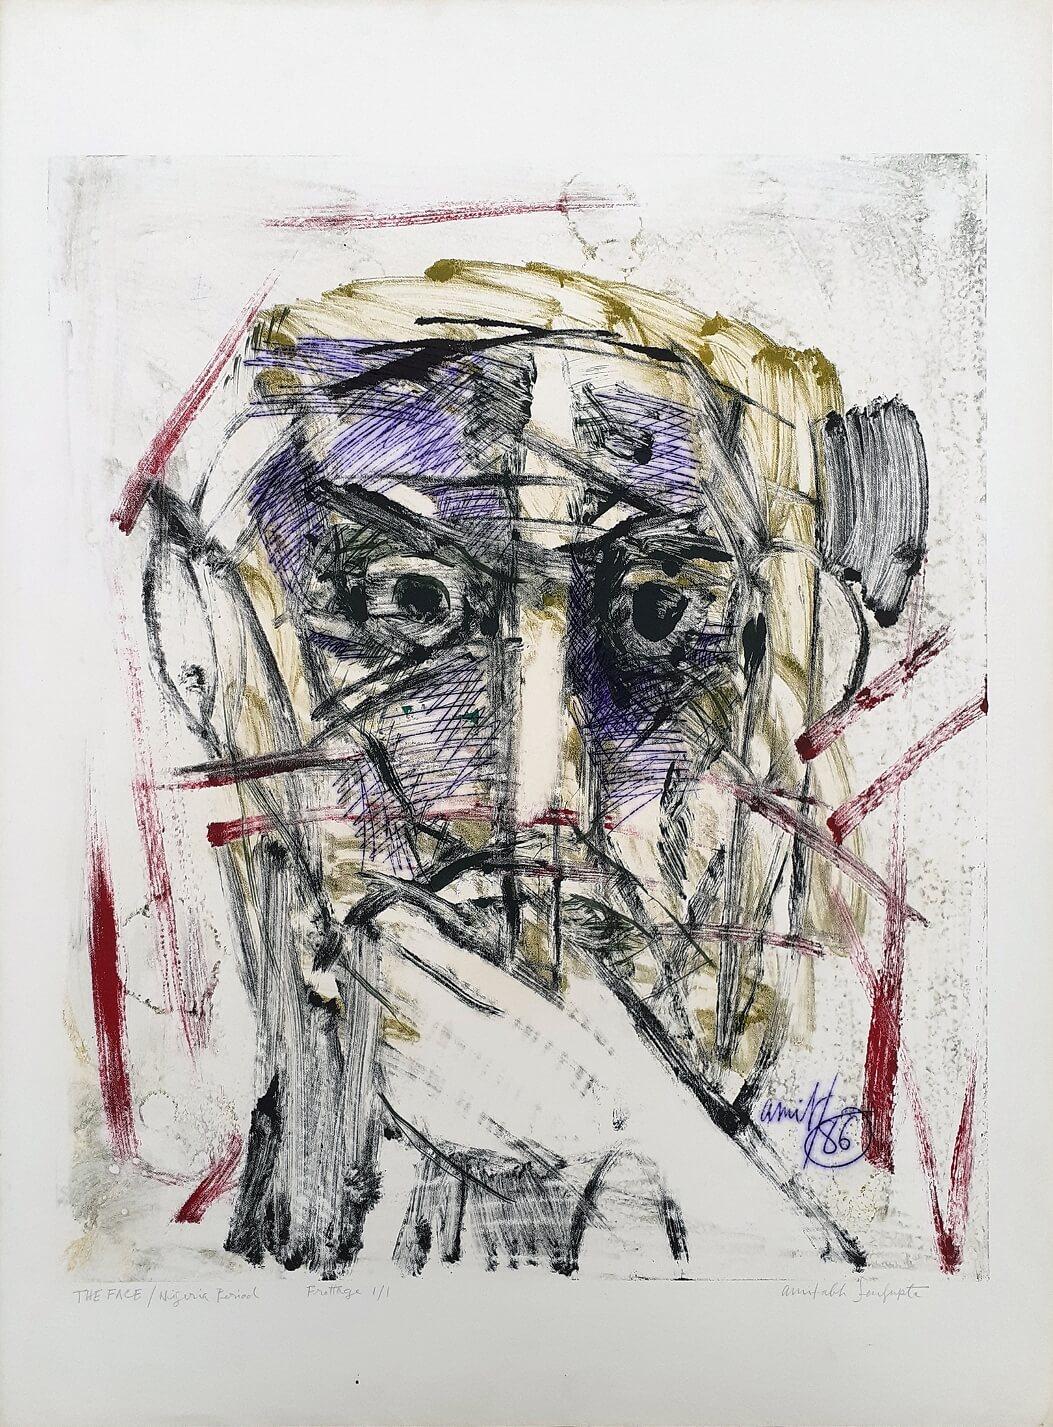 The Face Nigeria Period Frottage on Paper Edition 1/1 by Indian Artist"In Stock" - Mixed Media Art by Amitabh Sengupta